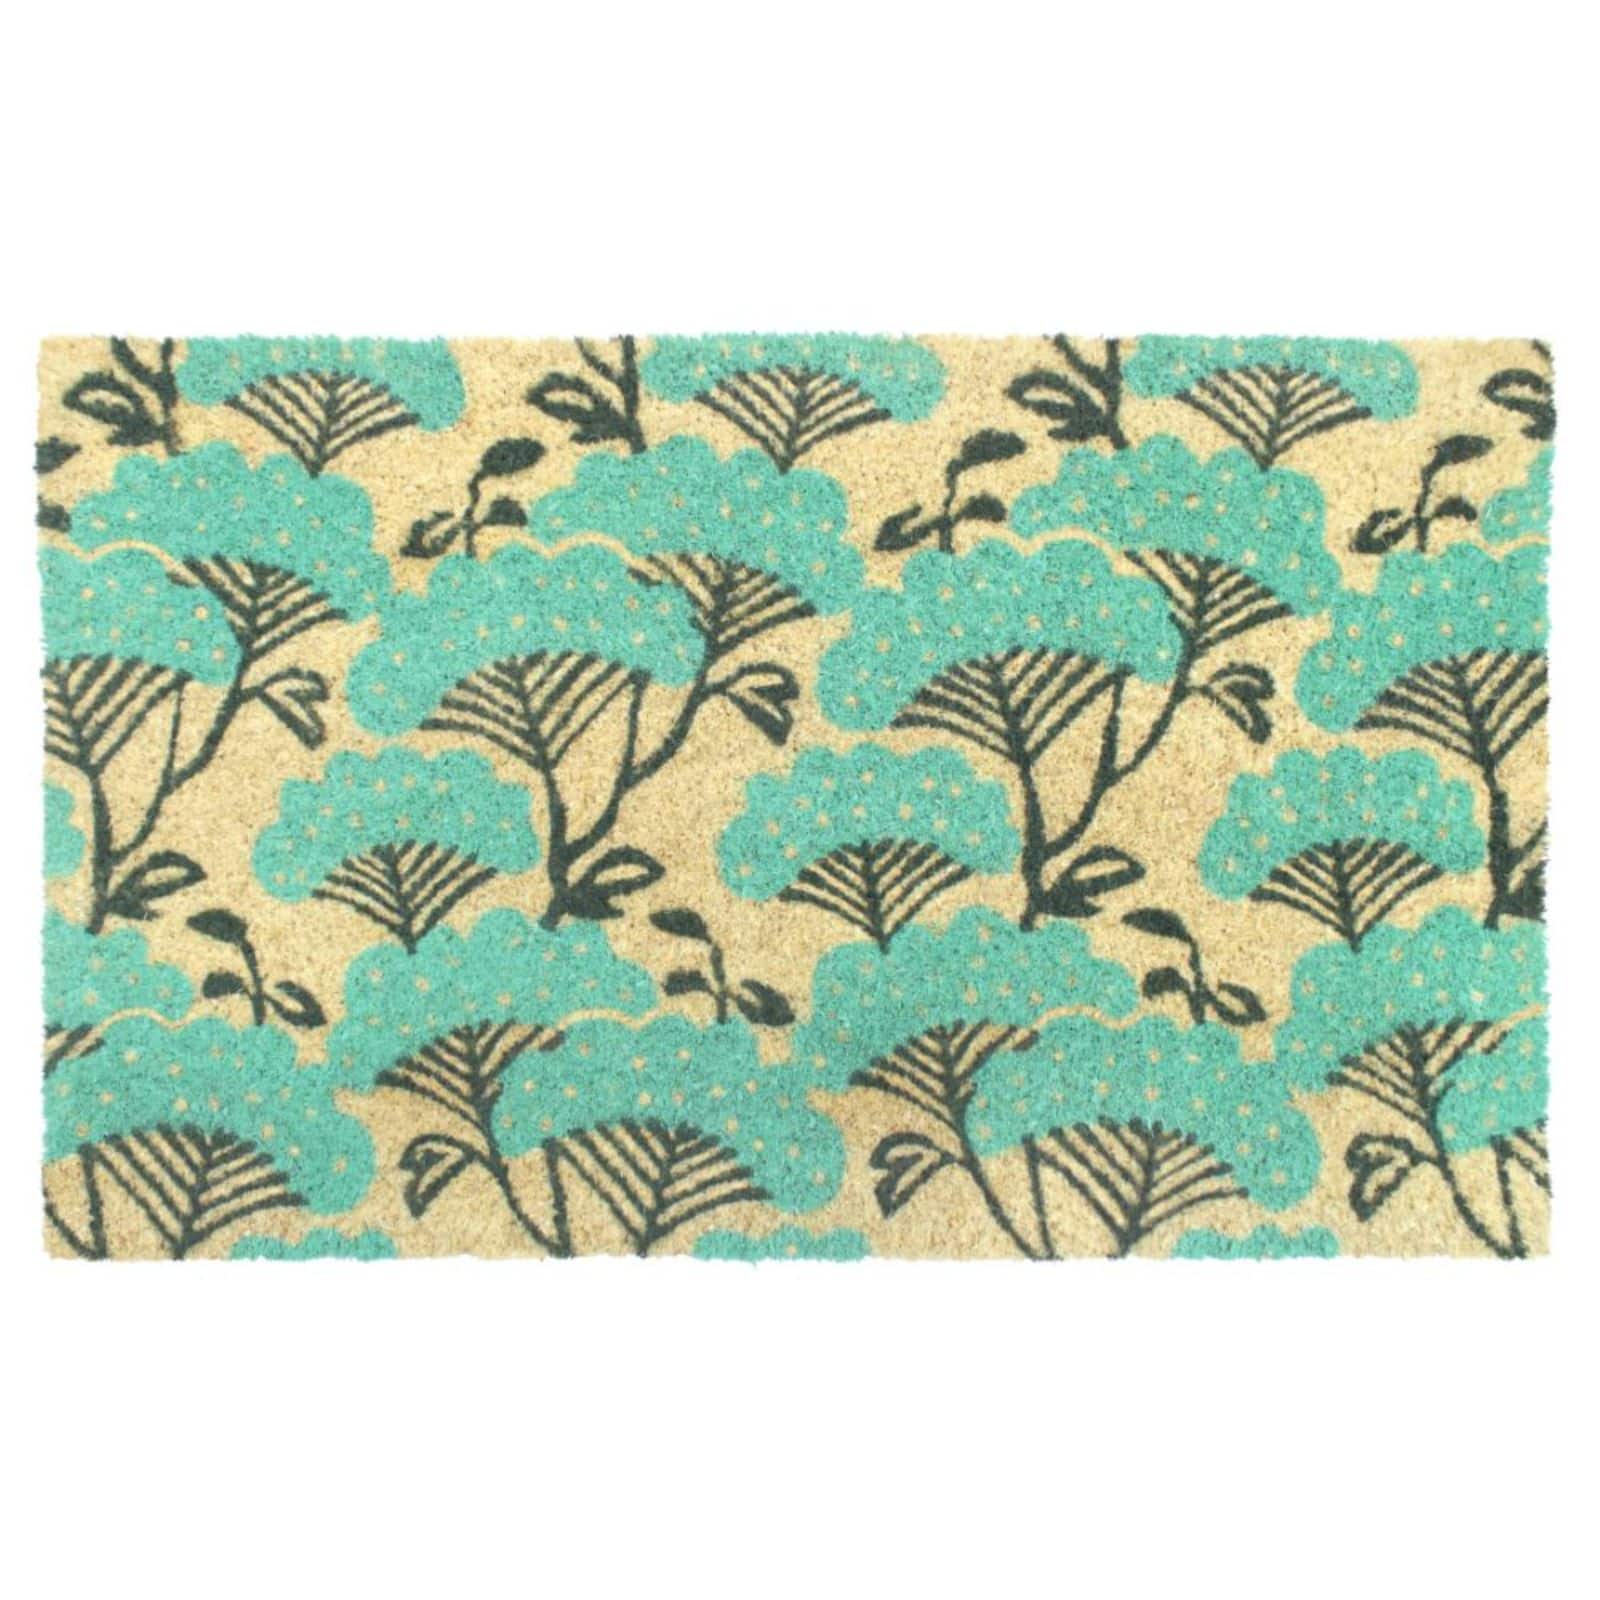 RugSmith Ice Green Blue Floral Machine Tufted Coir Doormat